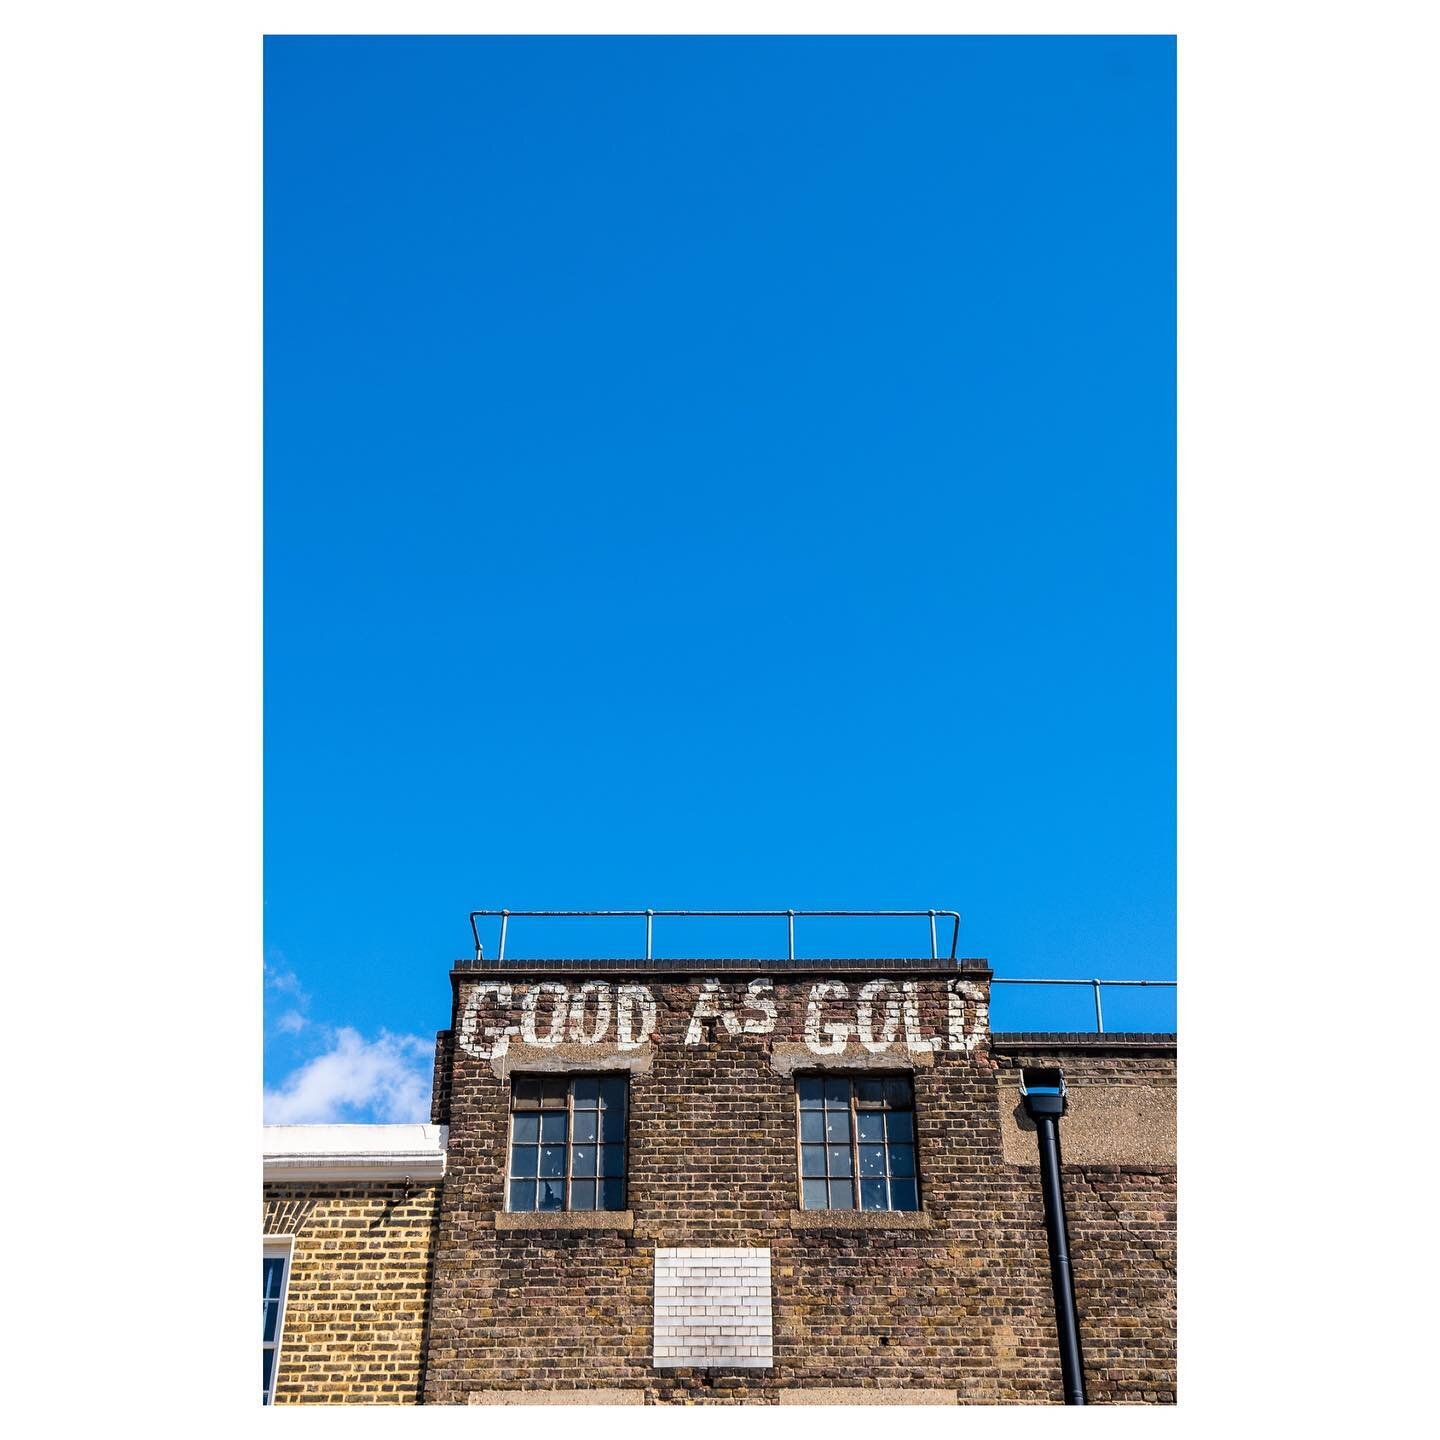 The Fifteen Minute Series
-
Good As Gold. 
-
Another image from my Fifteen Minute Series. My documentary series to capture the unique world that is Bankside. 
-
I'll be exhibiting this images at @banksidehotel with @degreeart until June as a work in 